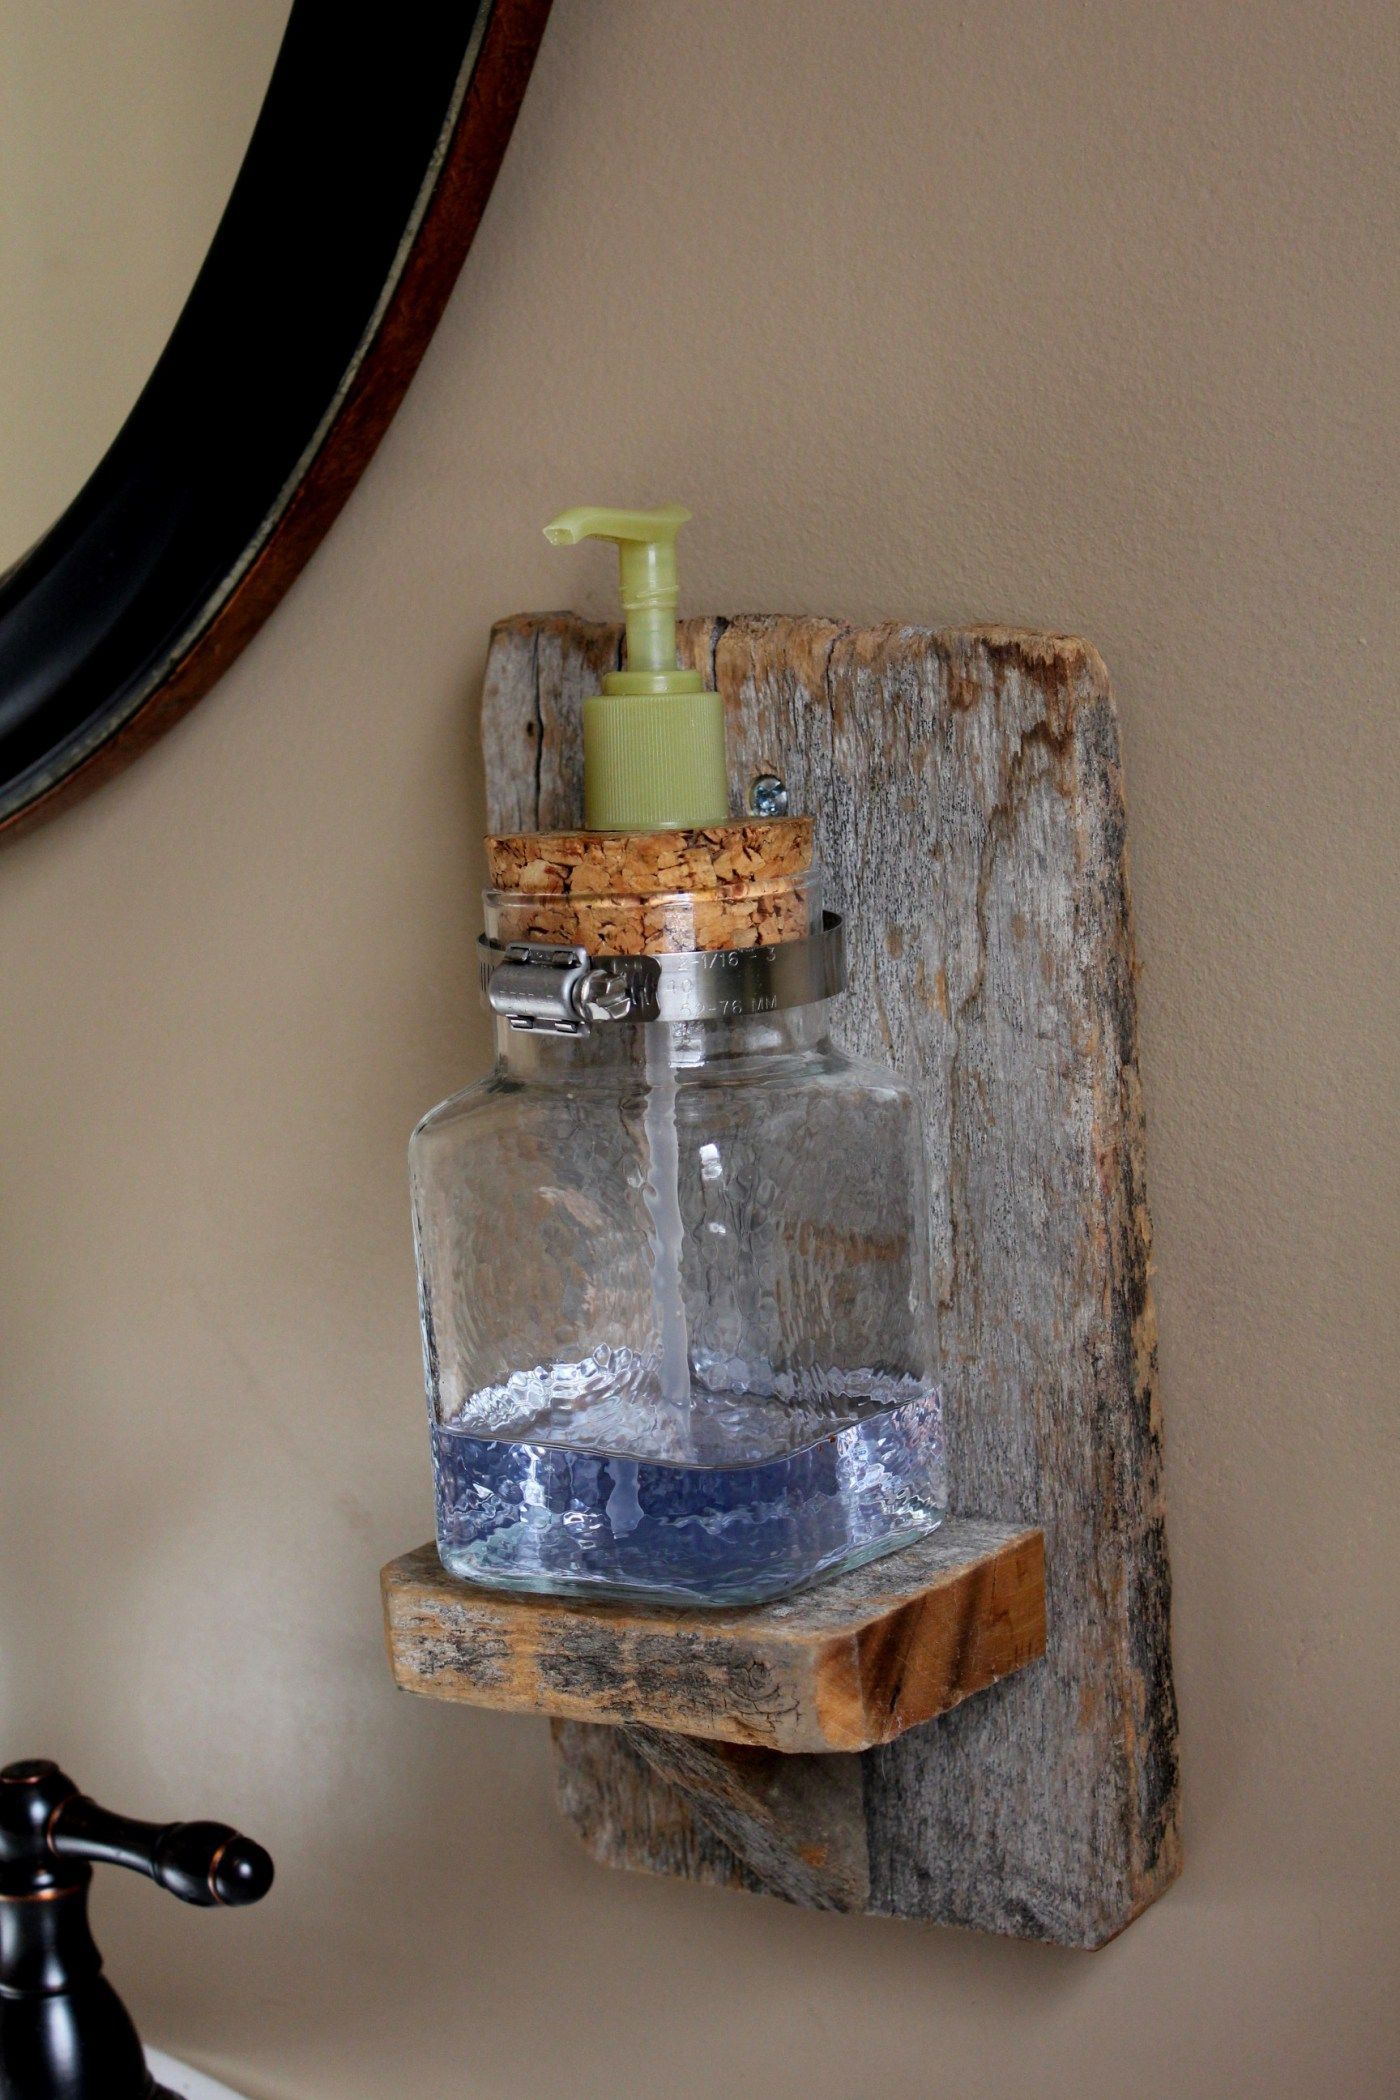 I have a small pedestal sink with no room for a soap dispenser which drives me nuts.  I love this idea.   My thanks to the